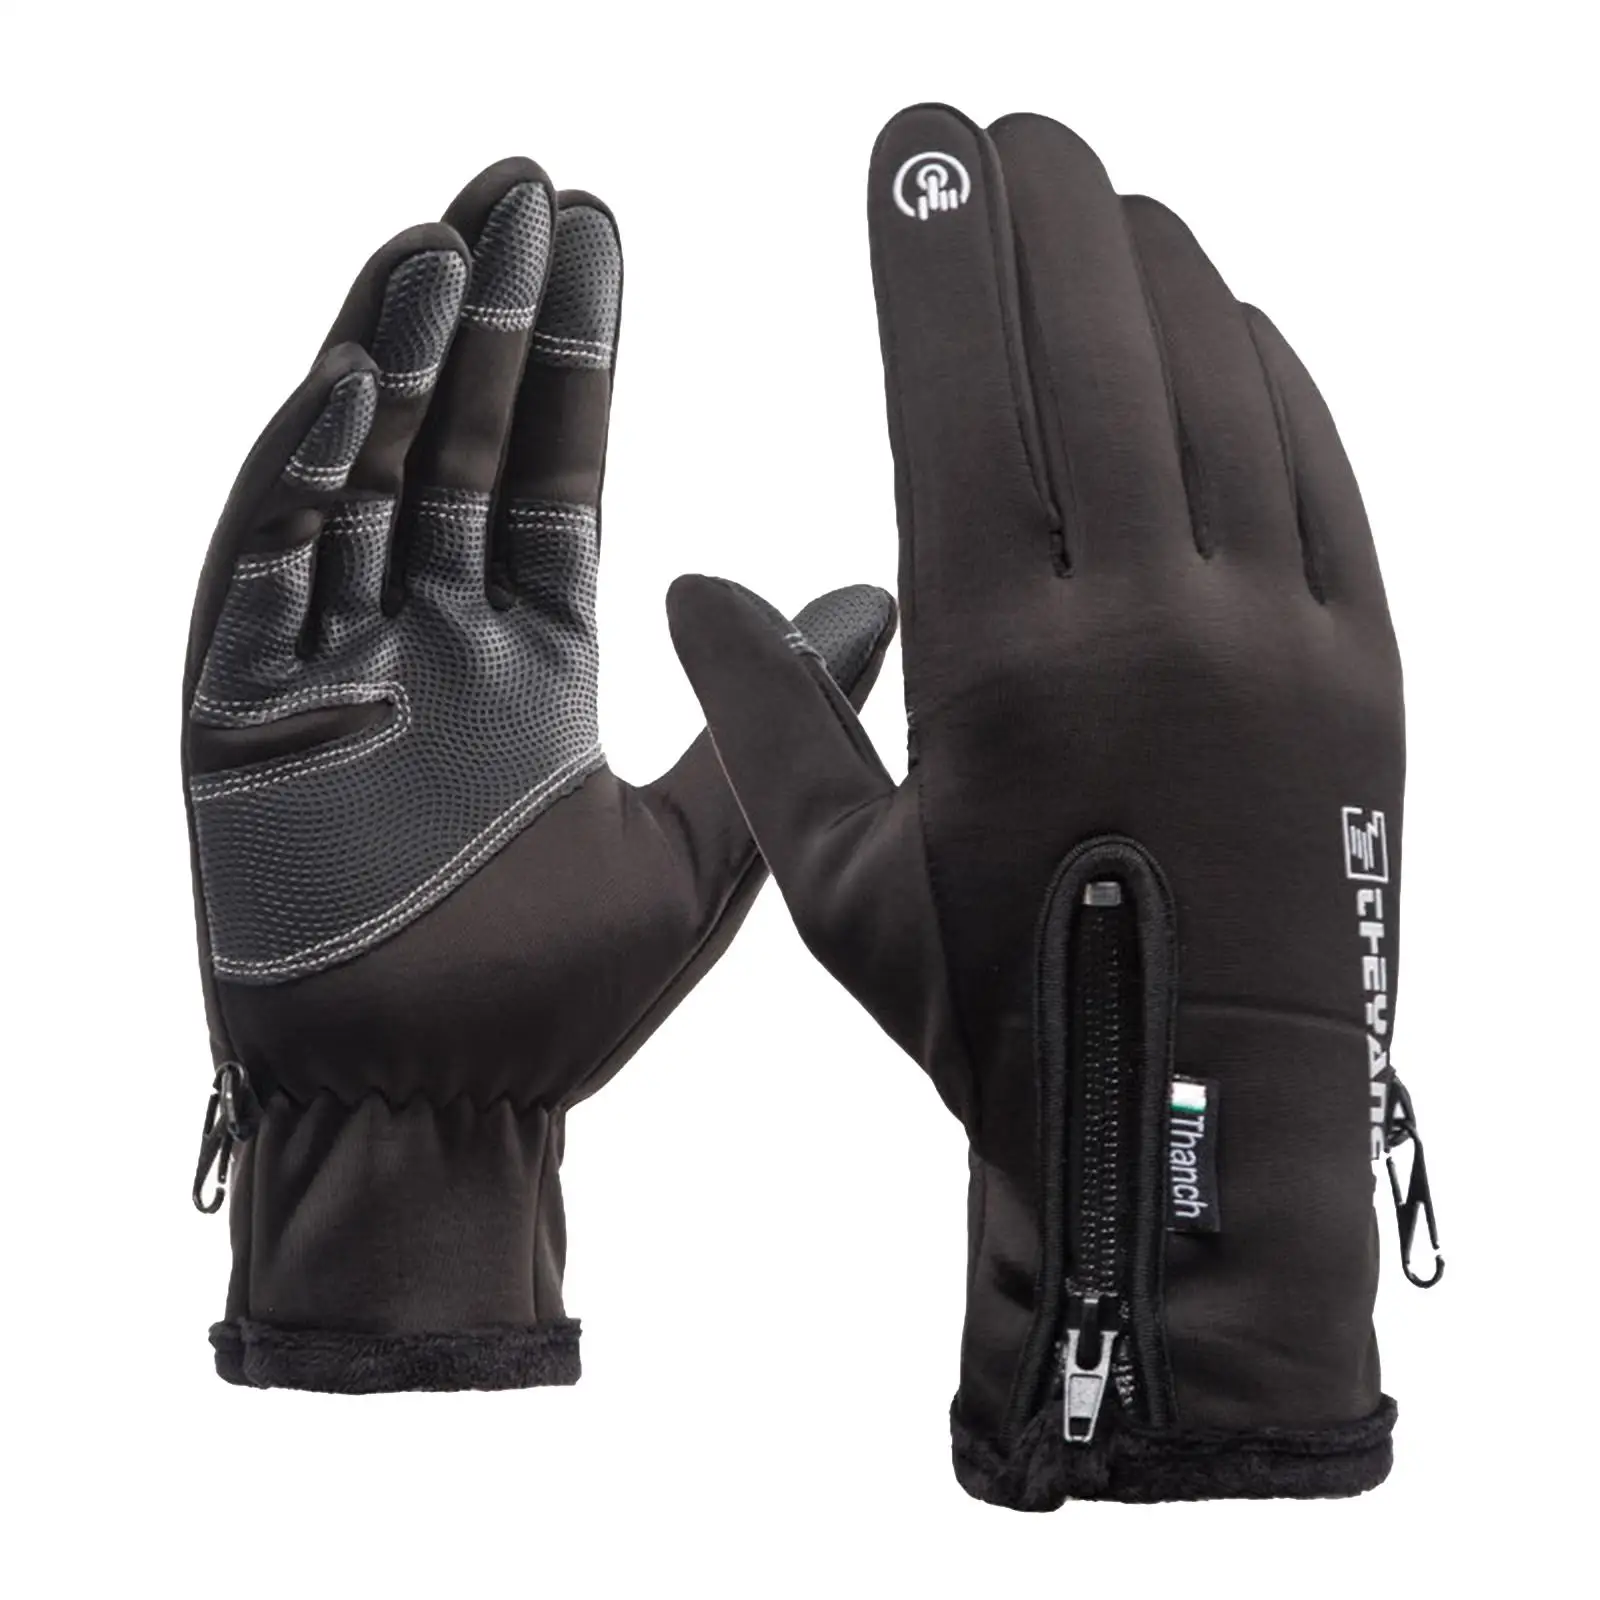 2 Pair Windproof Motorcycle Warm Gloves Cold Weather Cycling Working Hiking